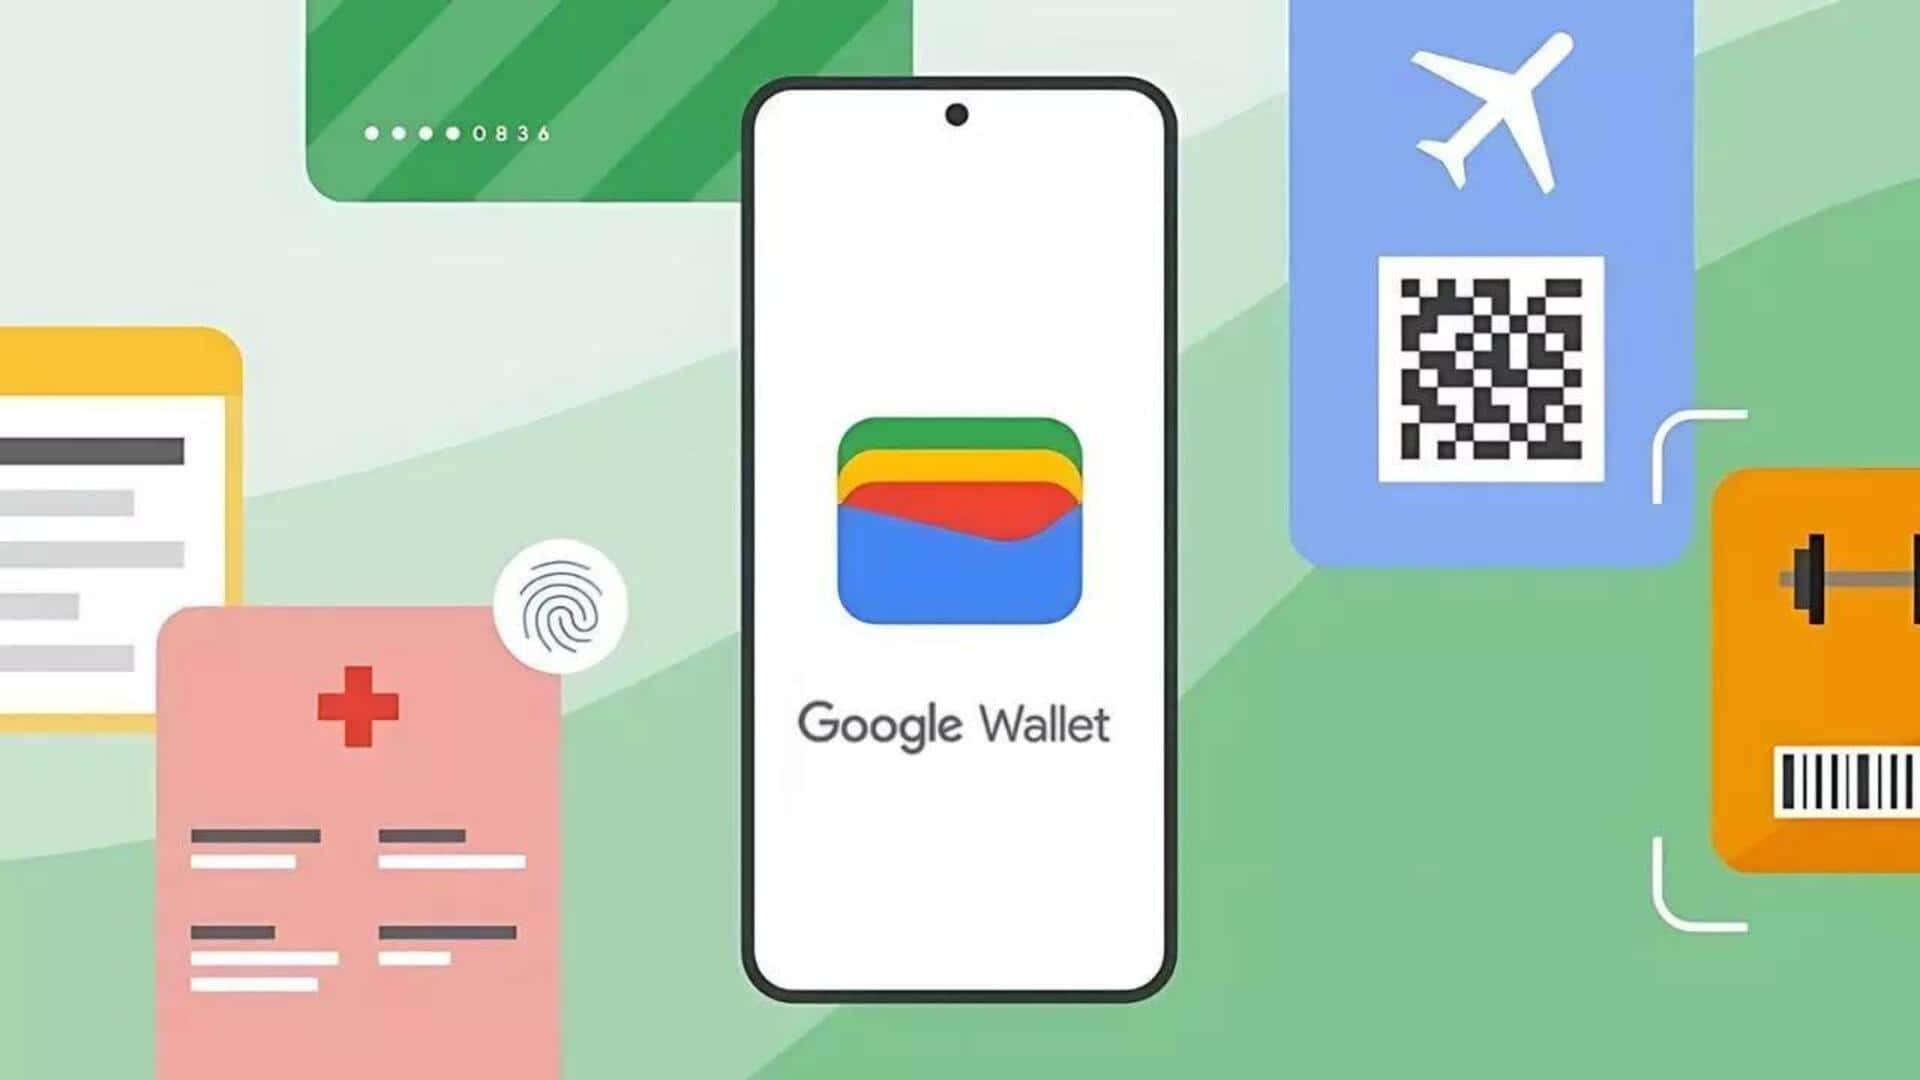 Google Wallet takes over transaction notifications from Google Play